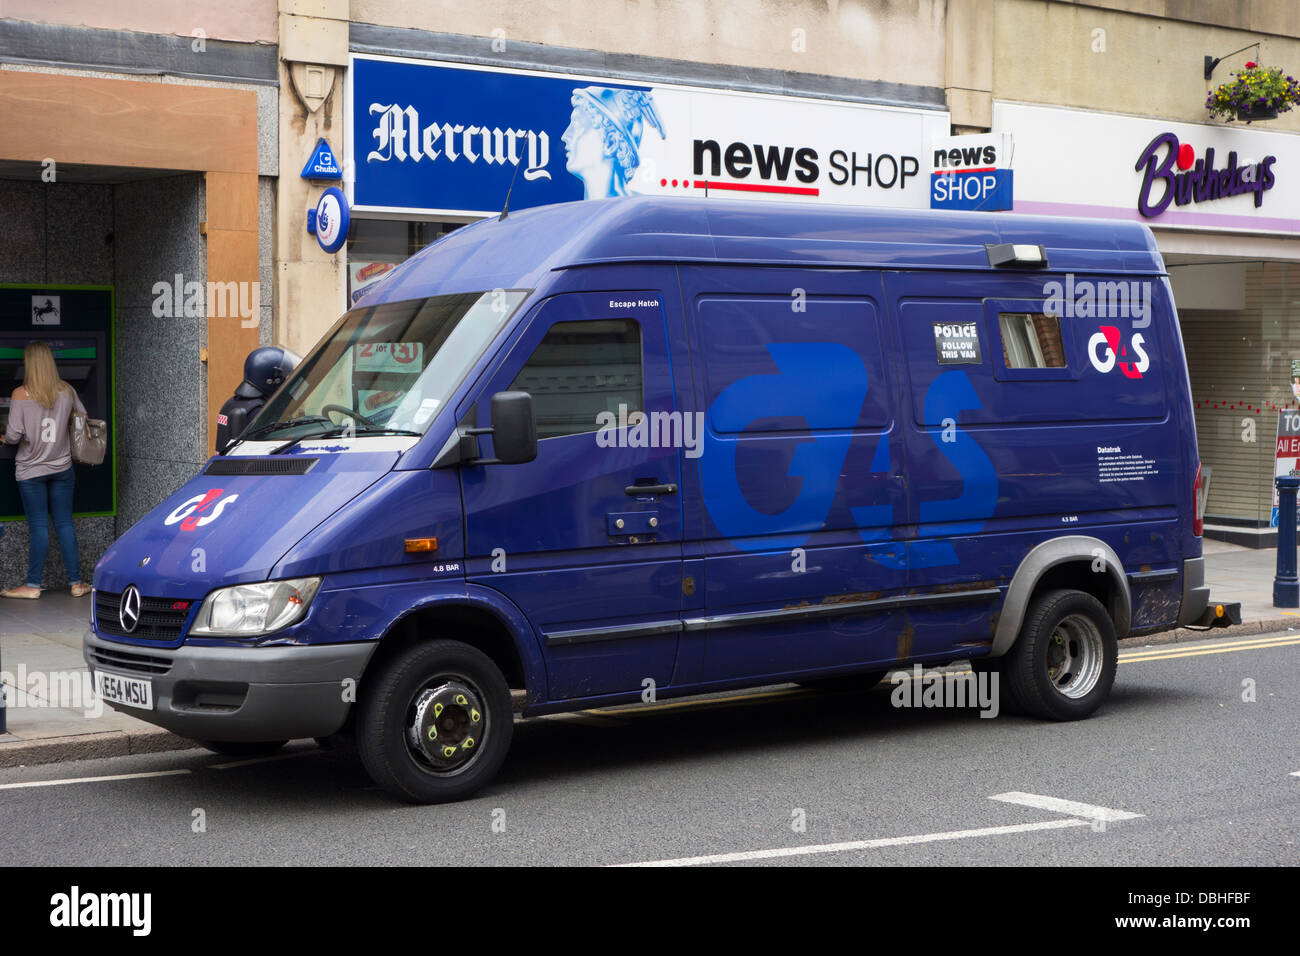 G4s Van High Resolution Stock Photography and Images - Alamy